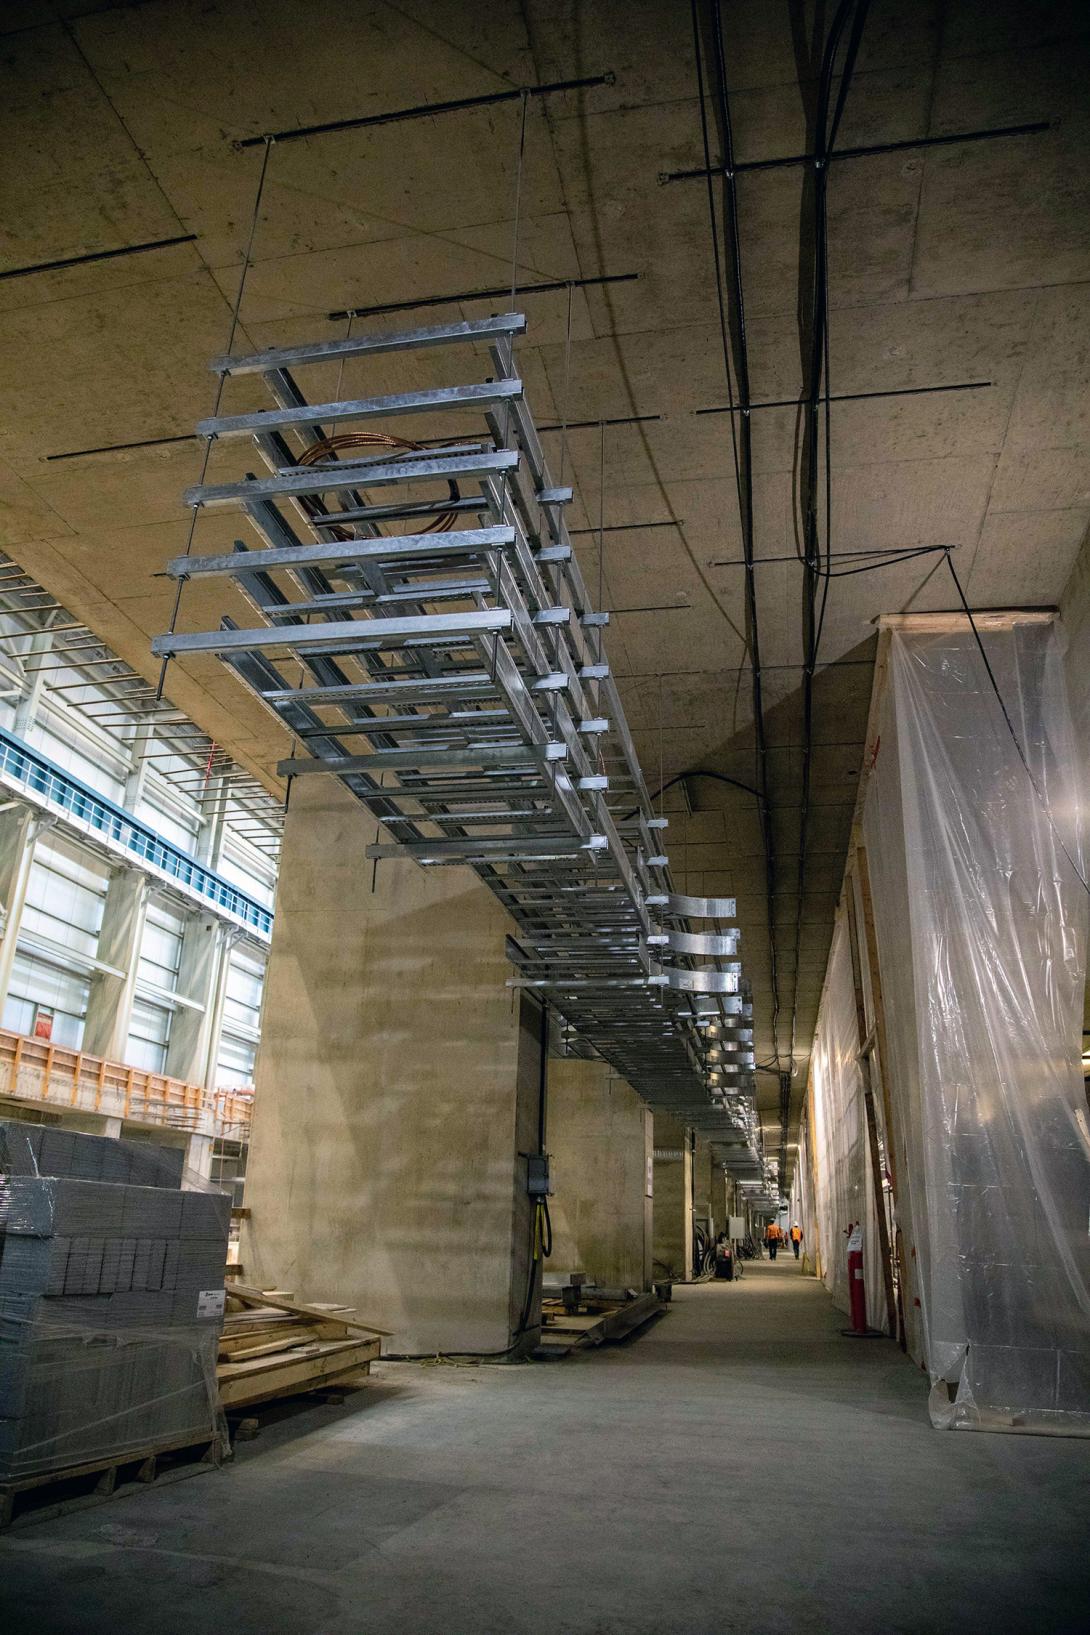 Installation of cable trays is underway in the powerhouse. | June 2022